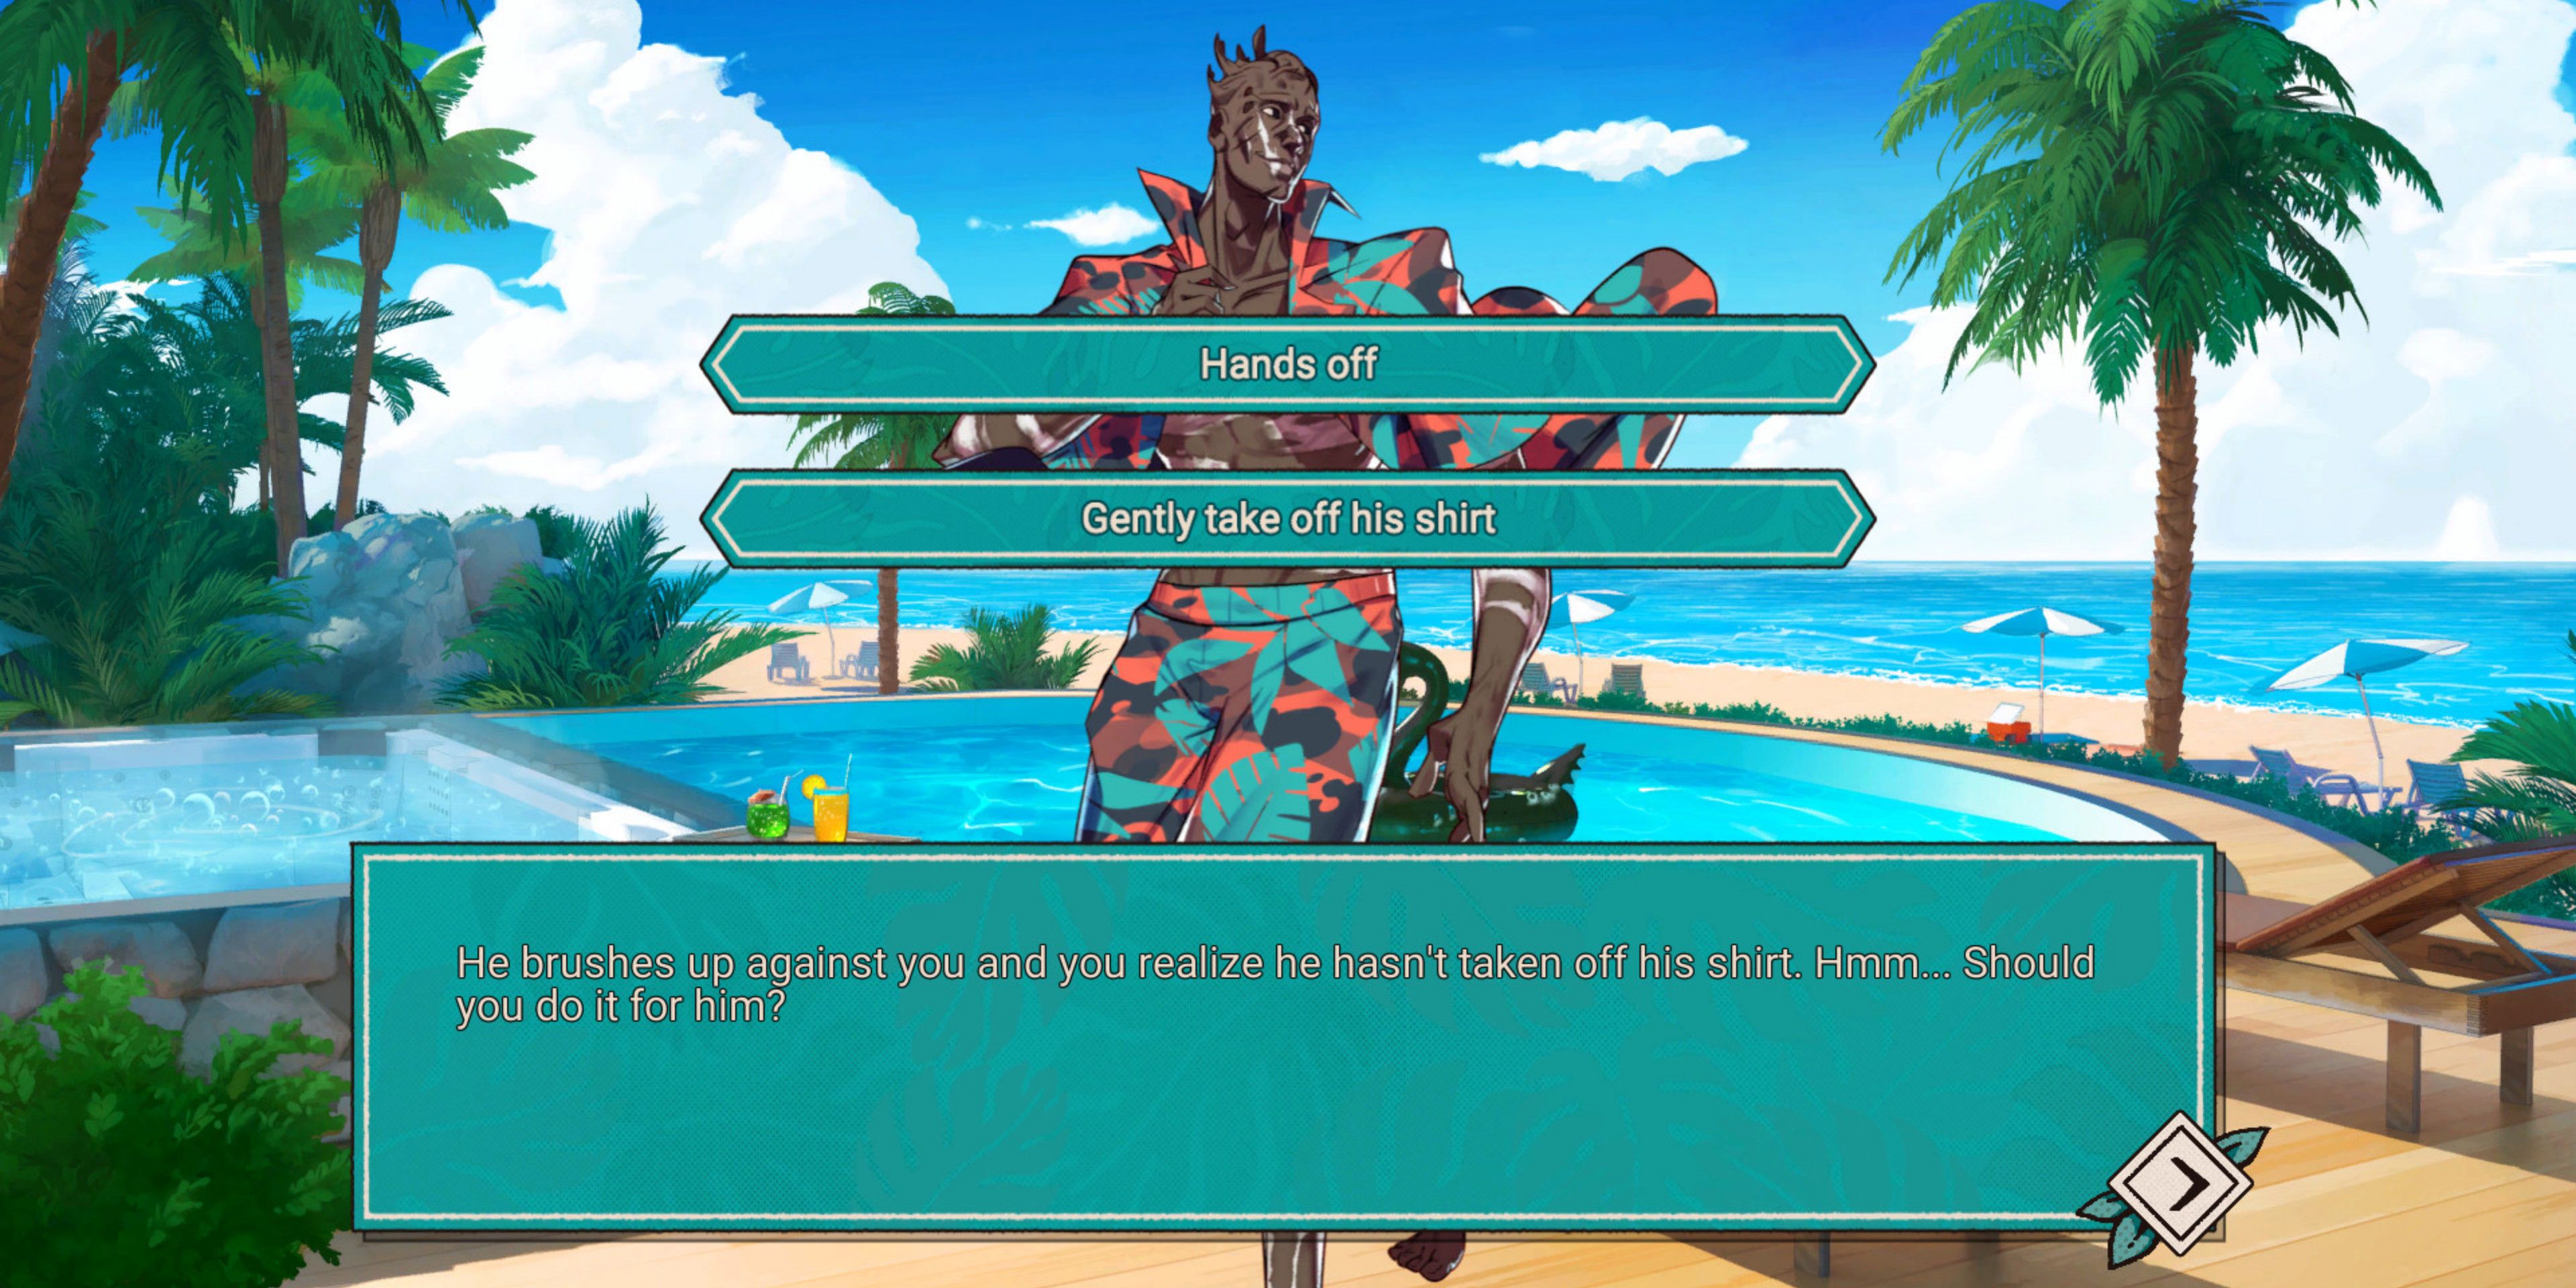 A dialogue option for the player during The Wraith's route